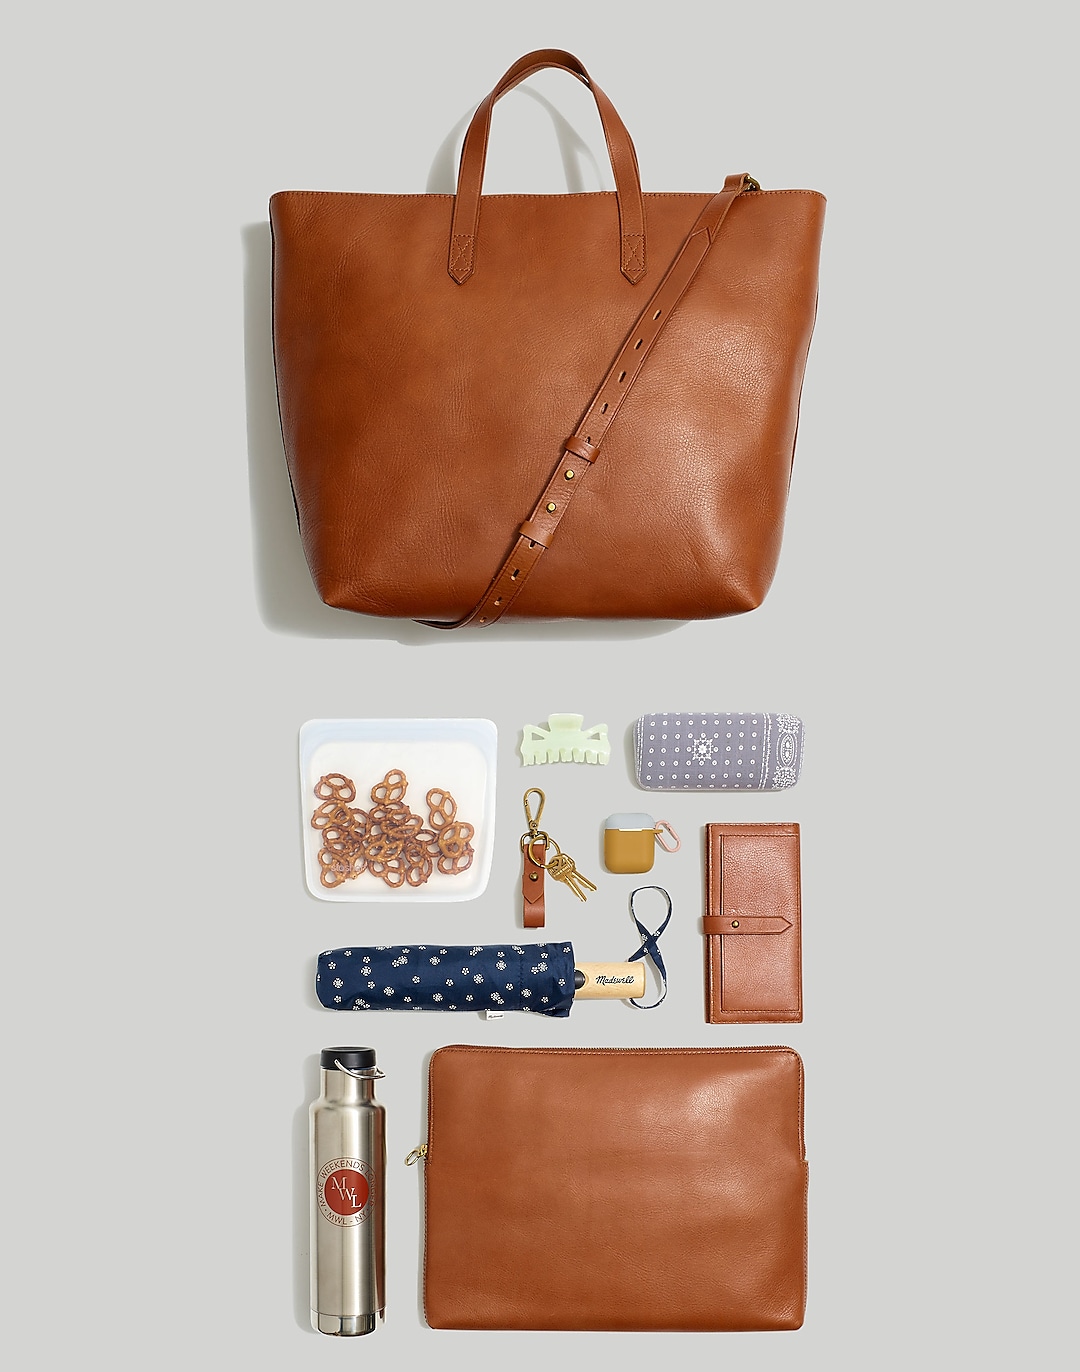 The Canvas Transport Carryall Tote Bag